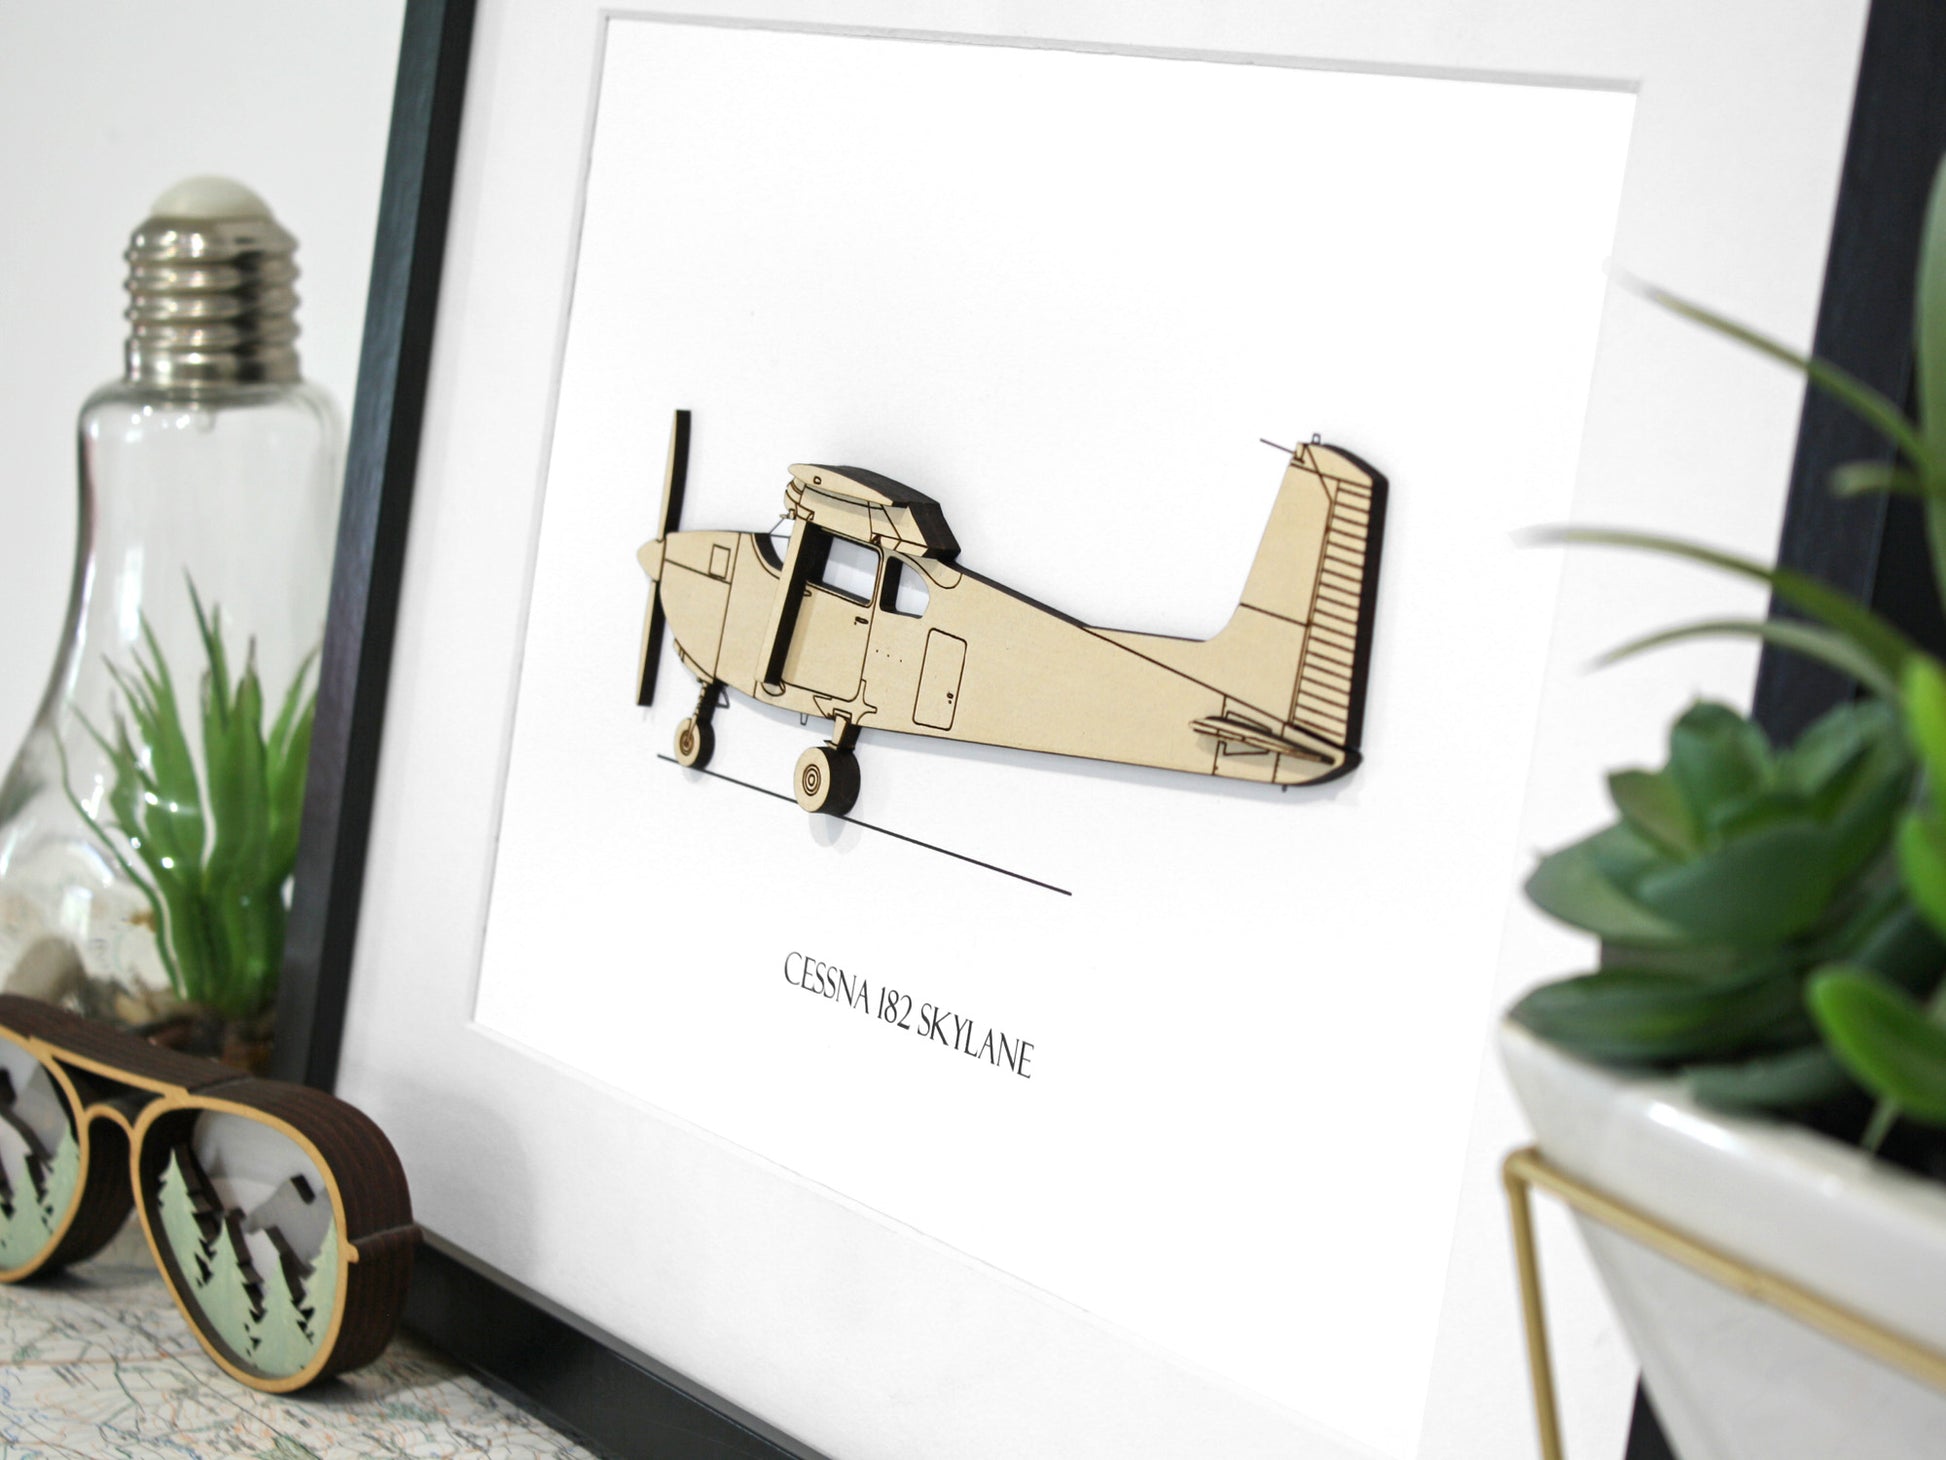 Cessna 182 straight tail aviation gifts